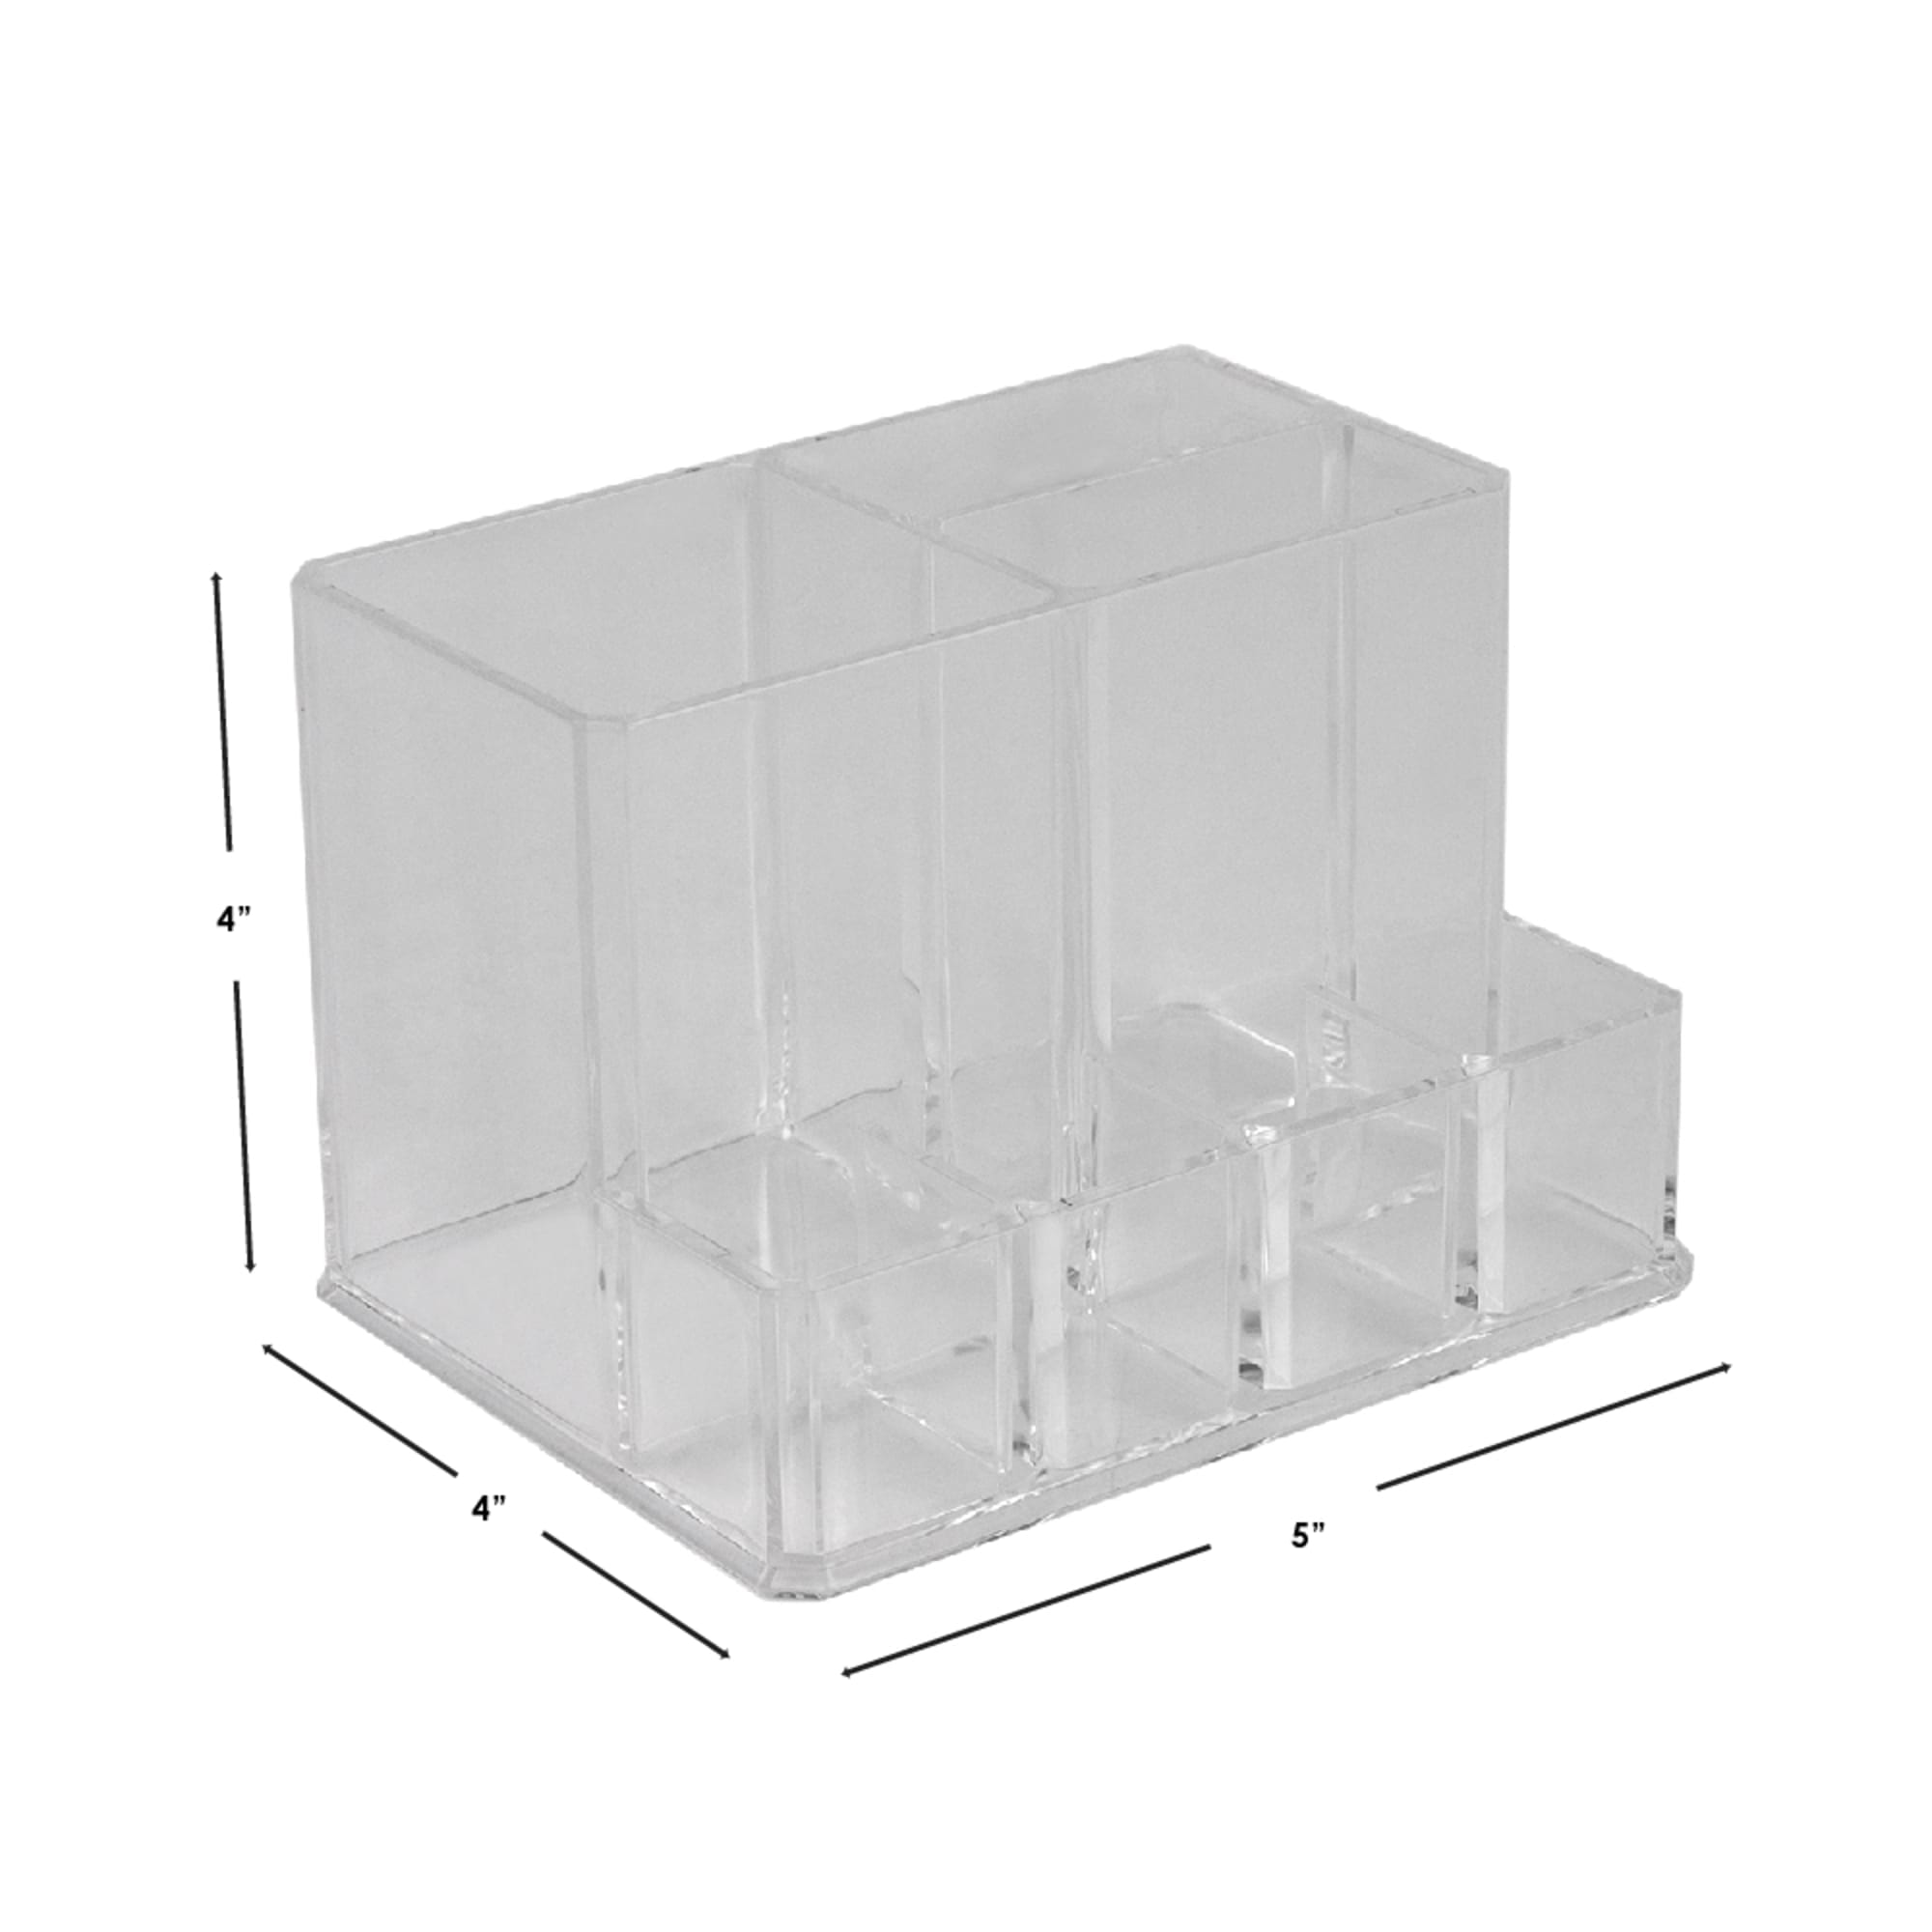 Home Basics Compact Shatter-Resistant Plastic Cosmetic Organizer, Clear $3.00 EACH, CASE PACK OF 12